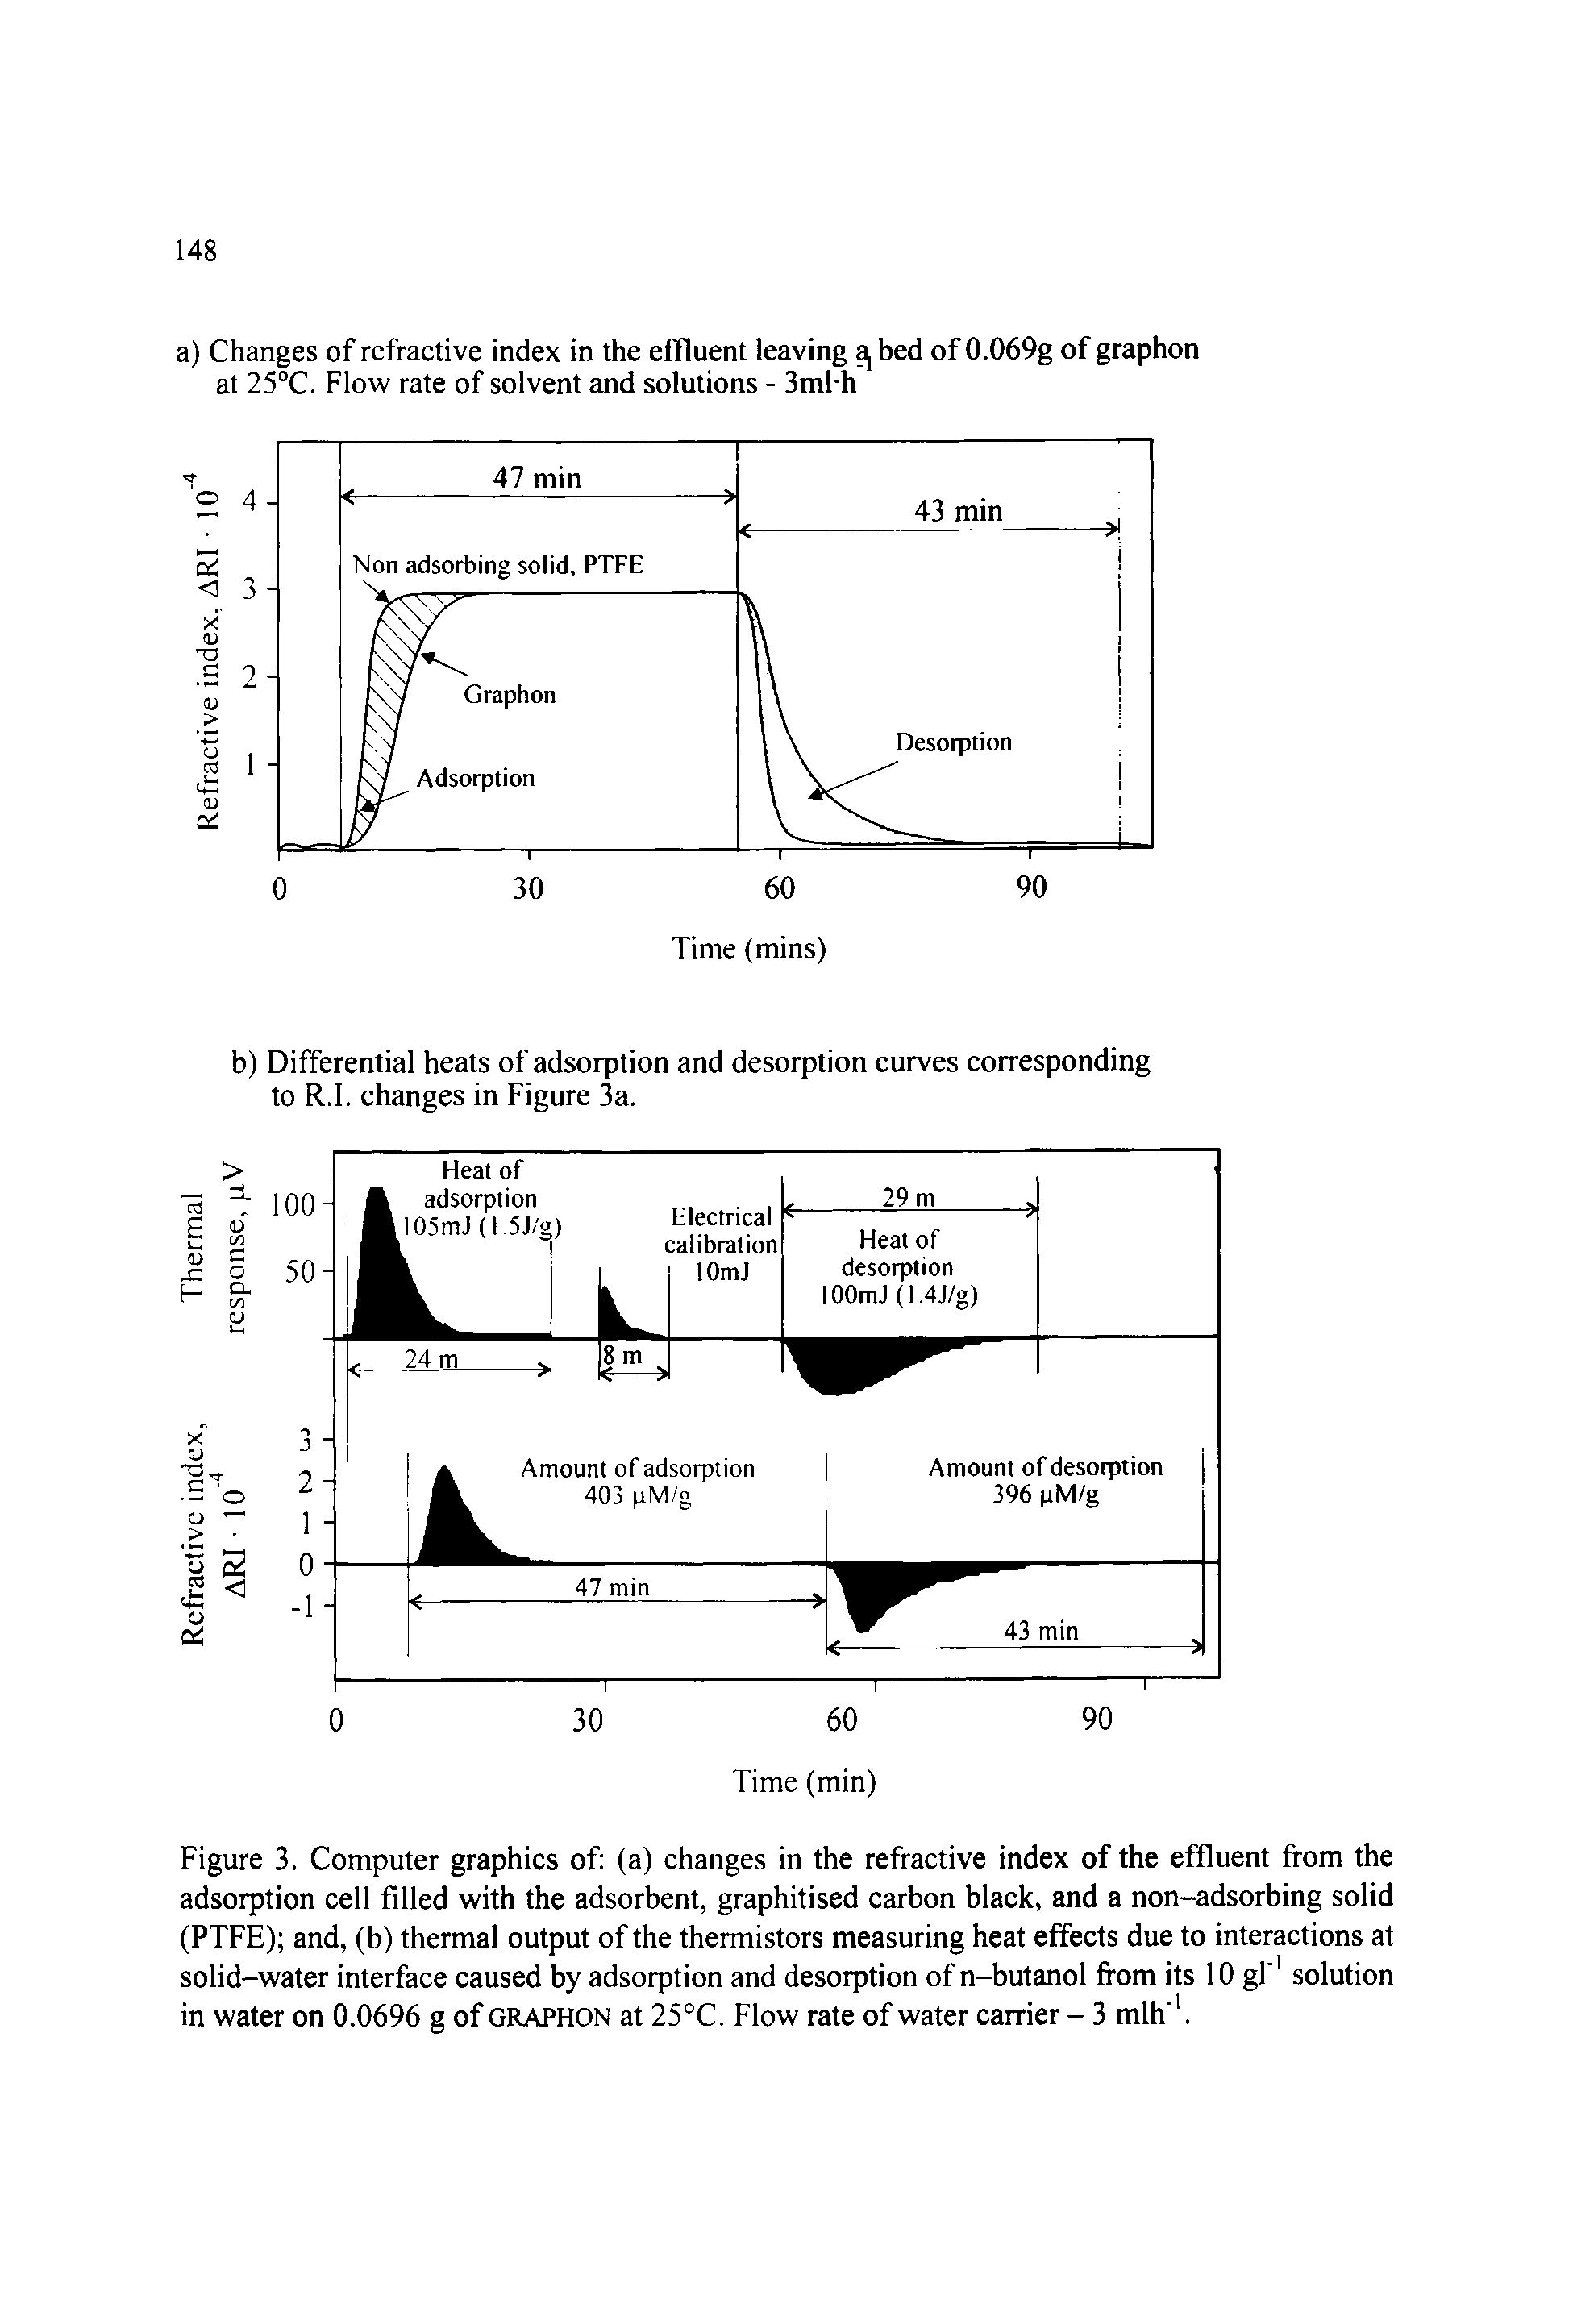 Figure 3. Computer graphics of (a) changes in the refractive index of the effluent from the adsorption cell filled with the adsorbent, graphitised carbon black, and a non-adsorbing solid (PTFE) and, (b) thermal output of the thermistors measuring heat effects due to interactions at solid-water interface caused by adsorption and desorption of n-butanol from its 10 gf solution in water on 0.0696 g of GRAPHON at 25°C. Flow rate of water carrier - 3 mlh. ...